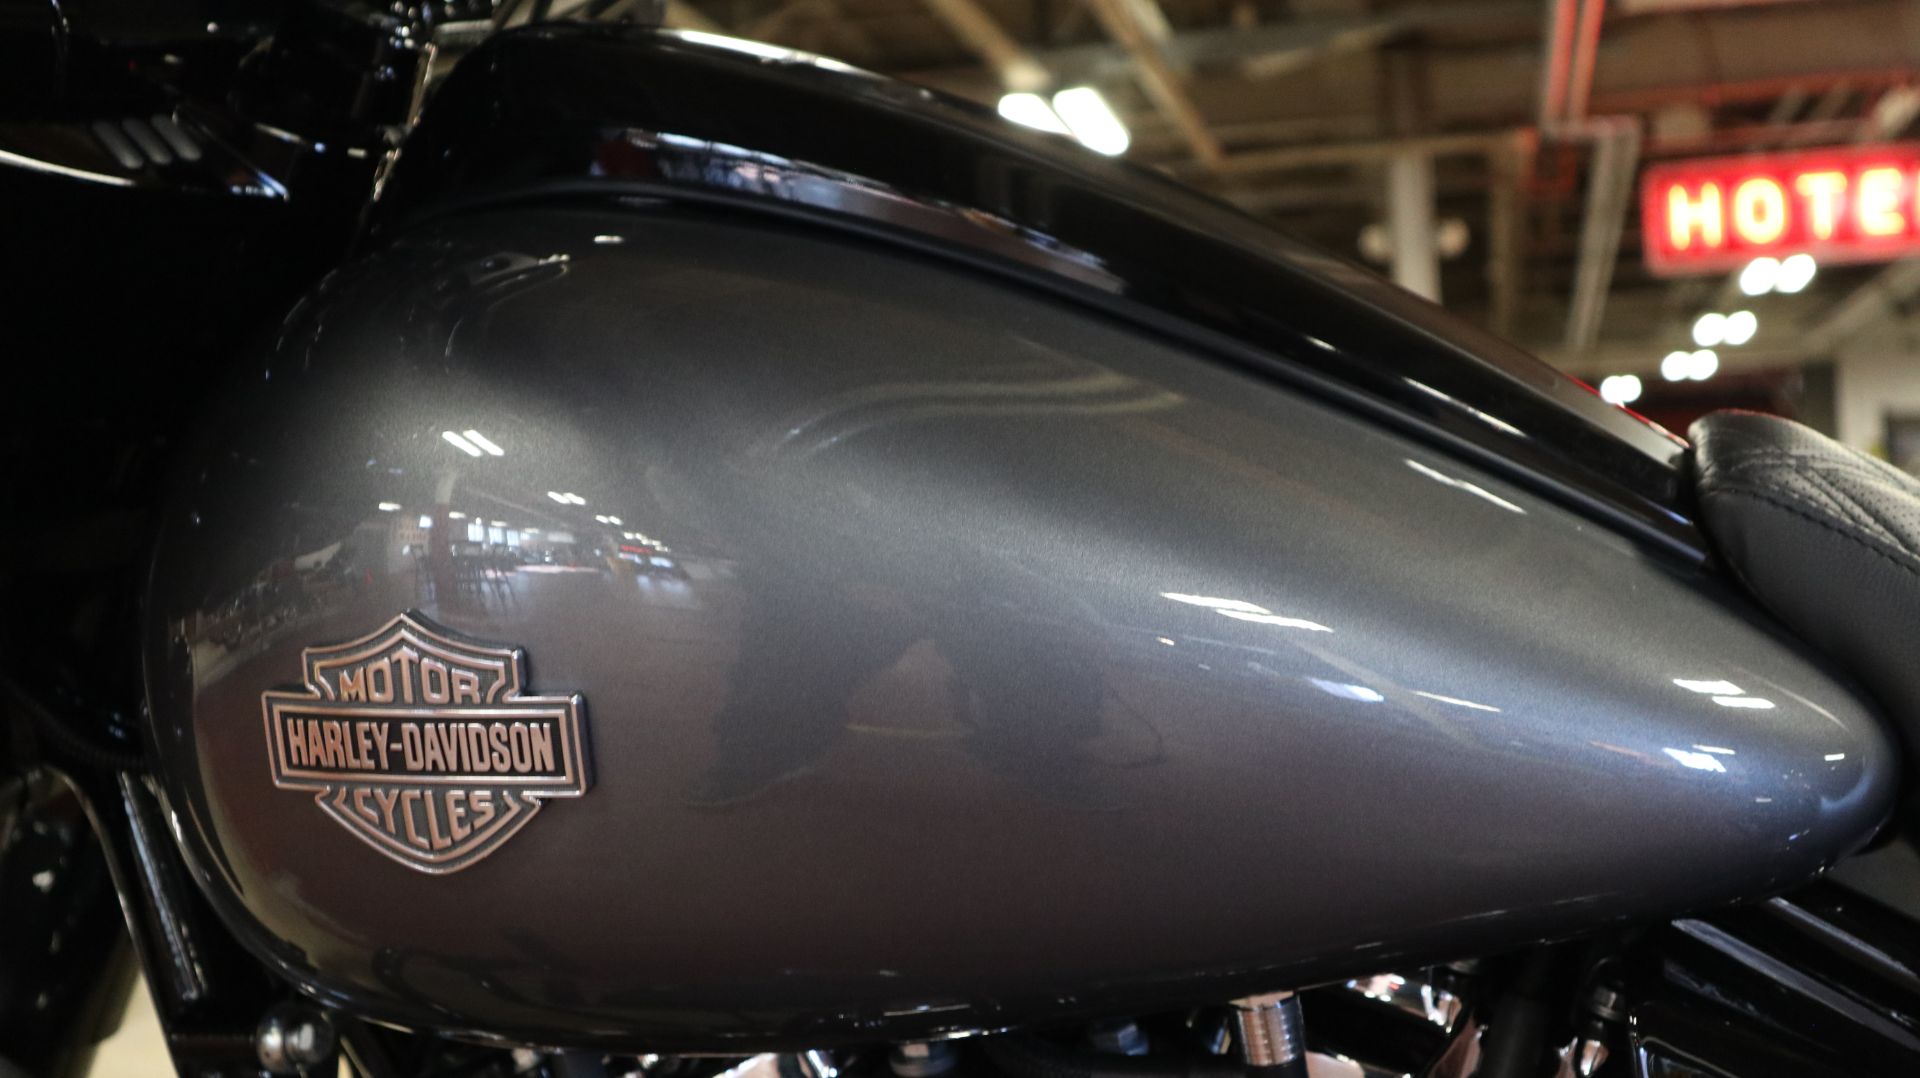 2021 Harley-Davidson Street Glide® Special in New London, Connecticut - Photo 10